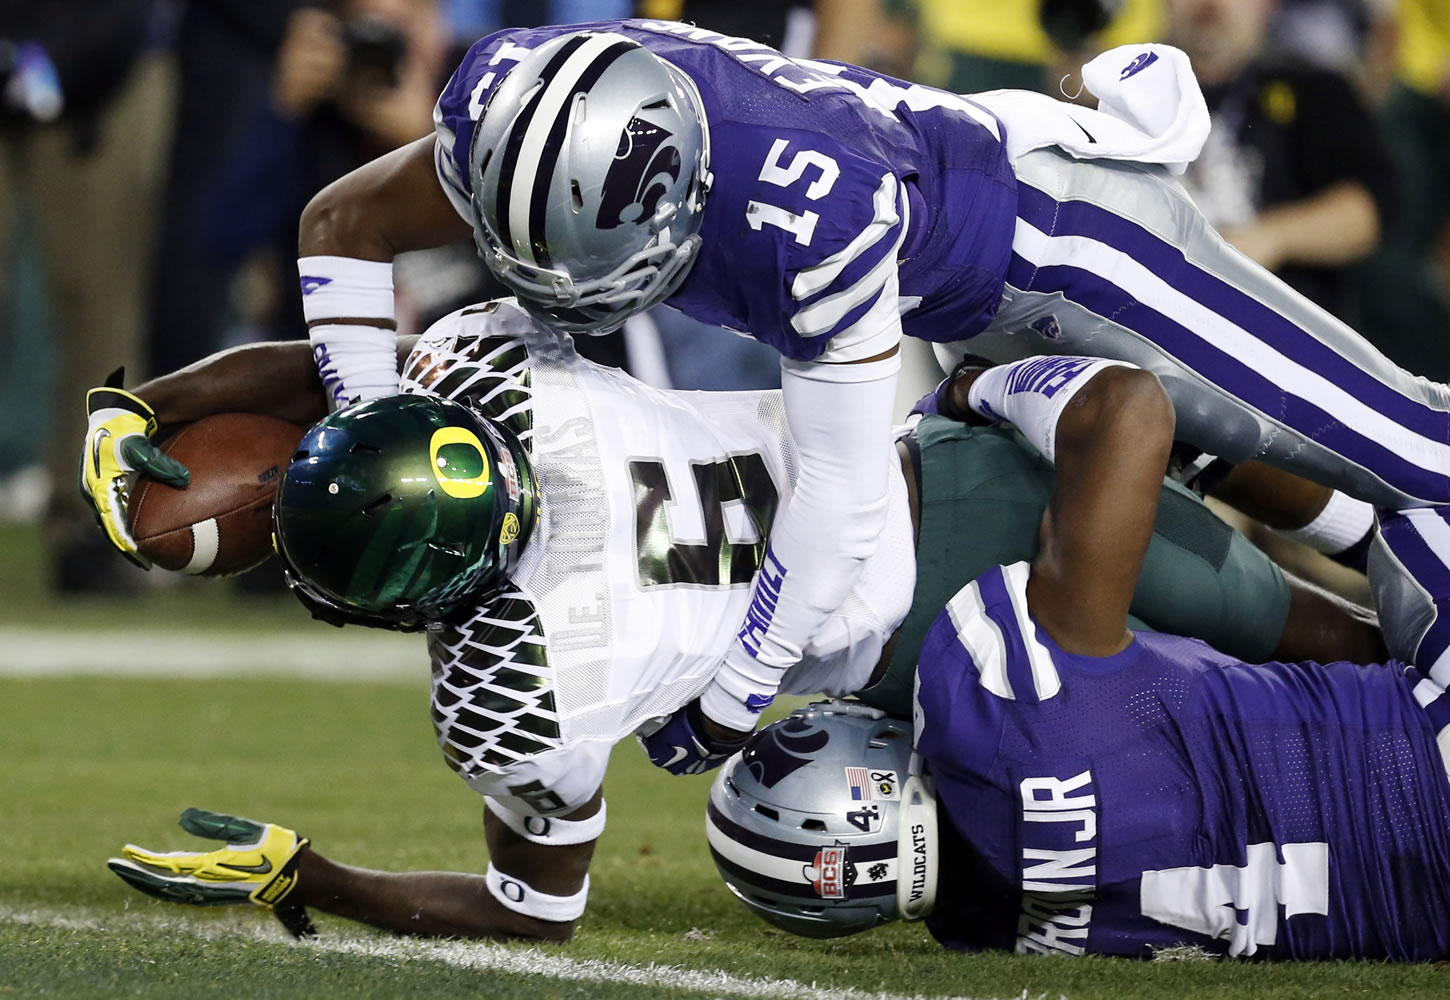 Oregon running back De'Anthony Thomas (6) scores a touchdown between Kansas State defensive back Randall Evans (15 ) and Arthur Brown (4) during the first half of the Fiesta Bowl on Thursday.